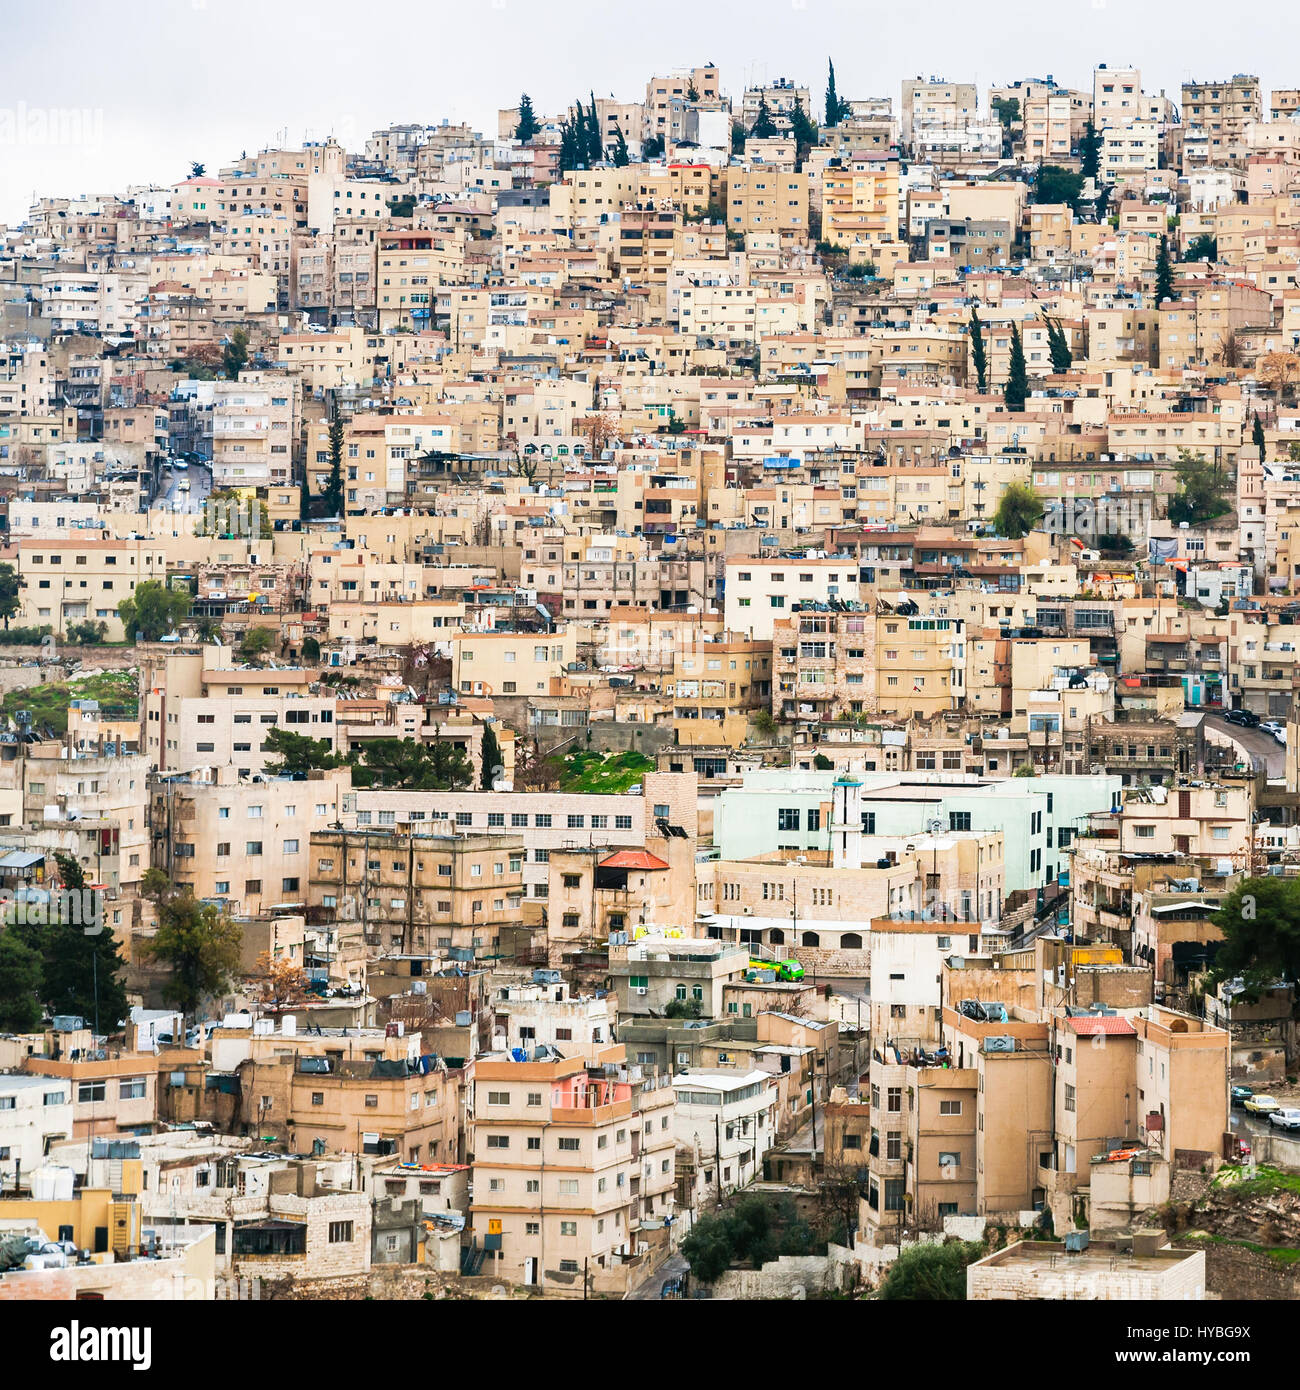 amman country